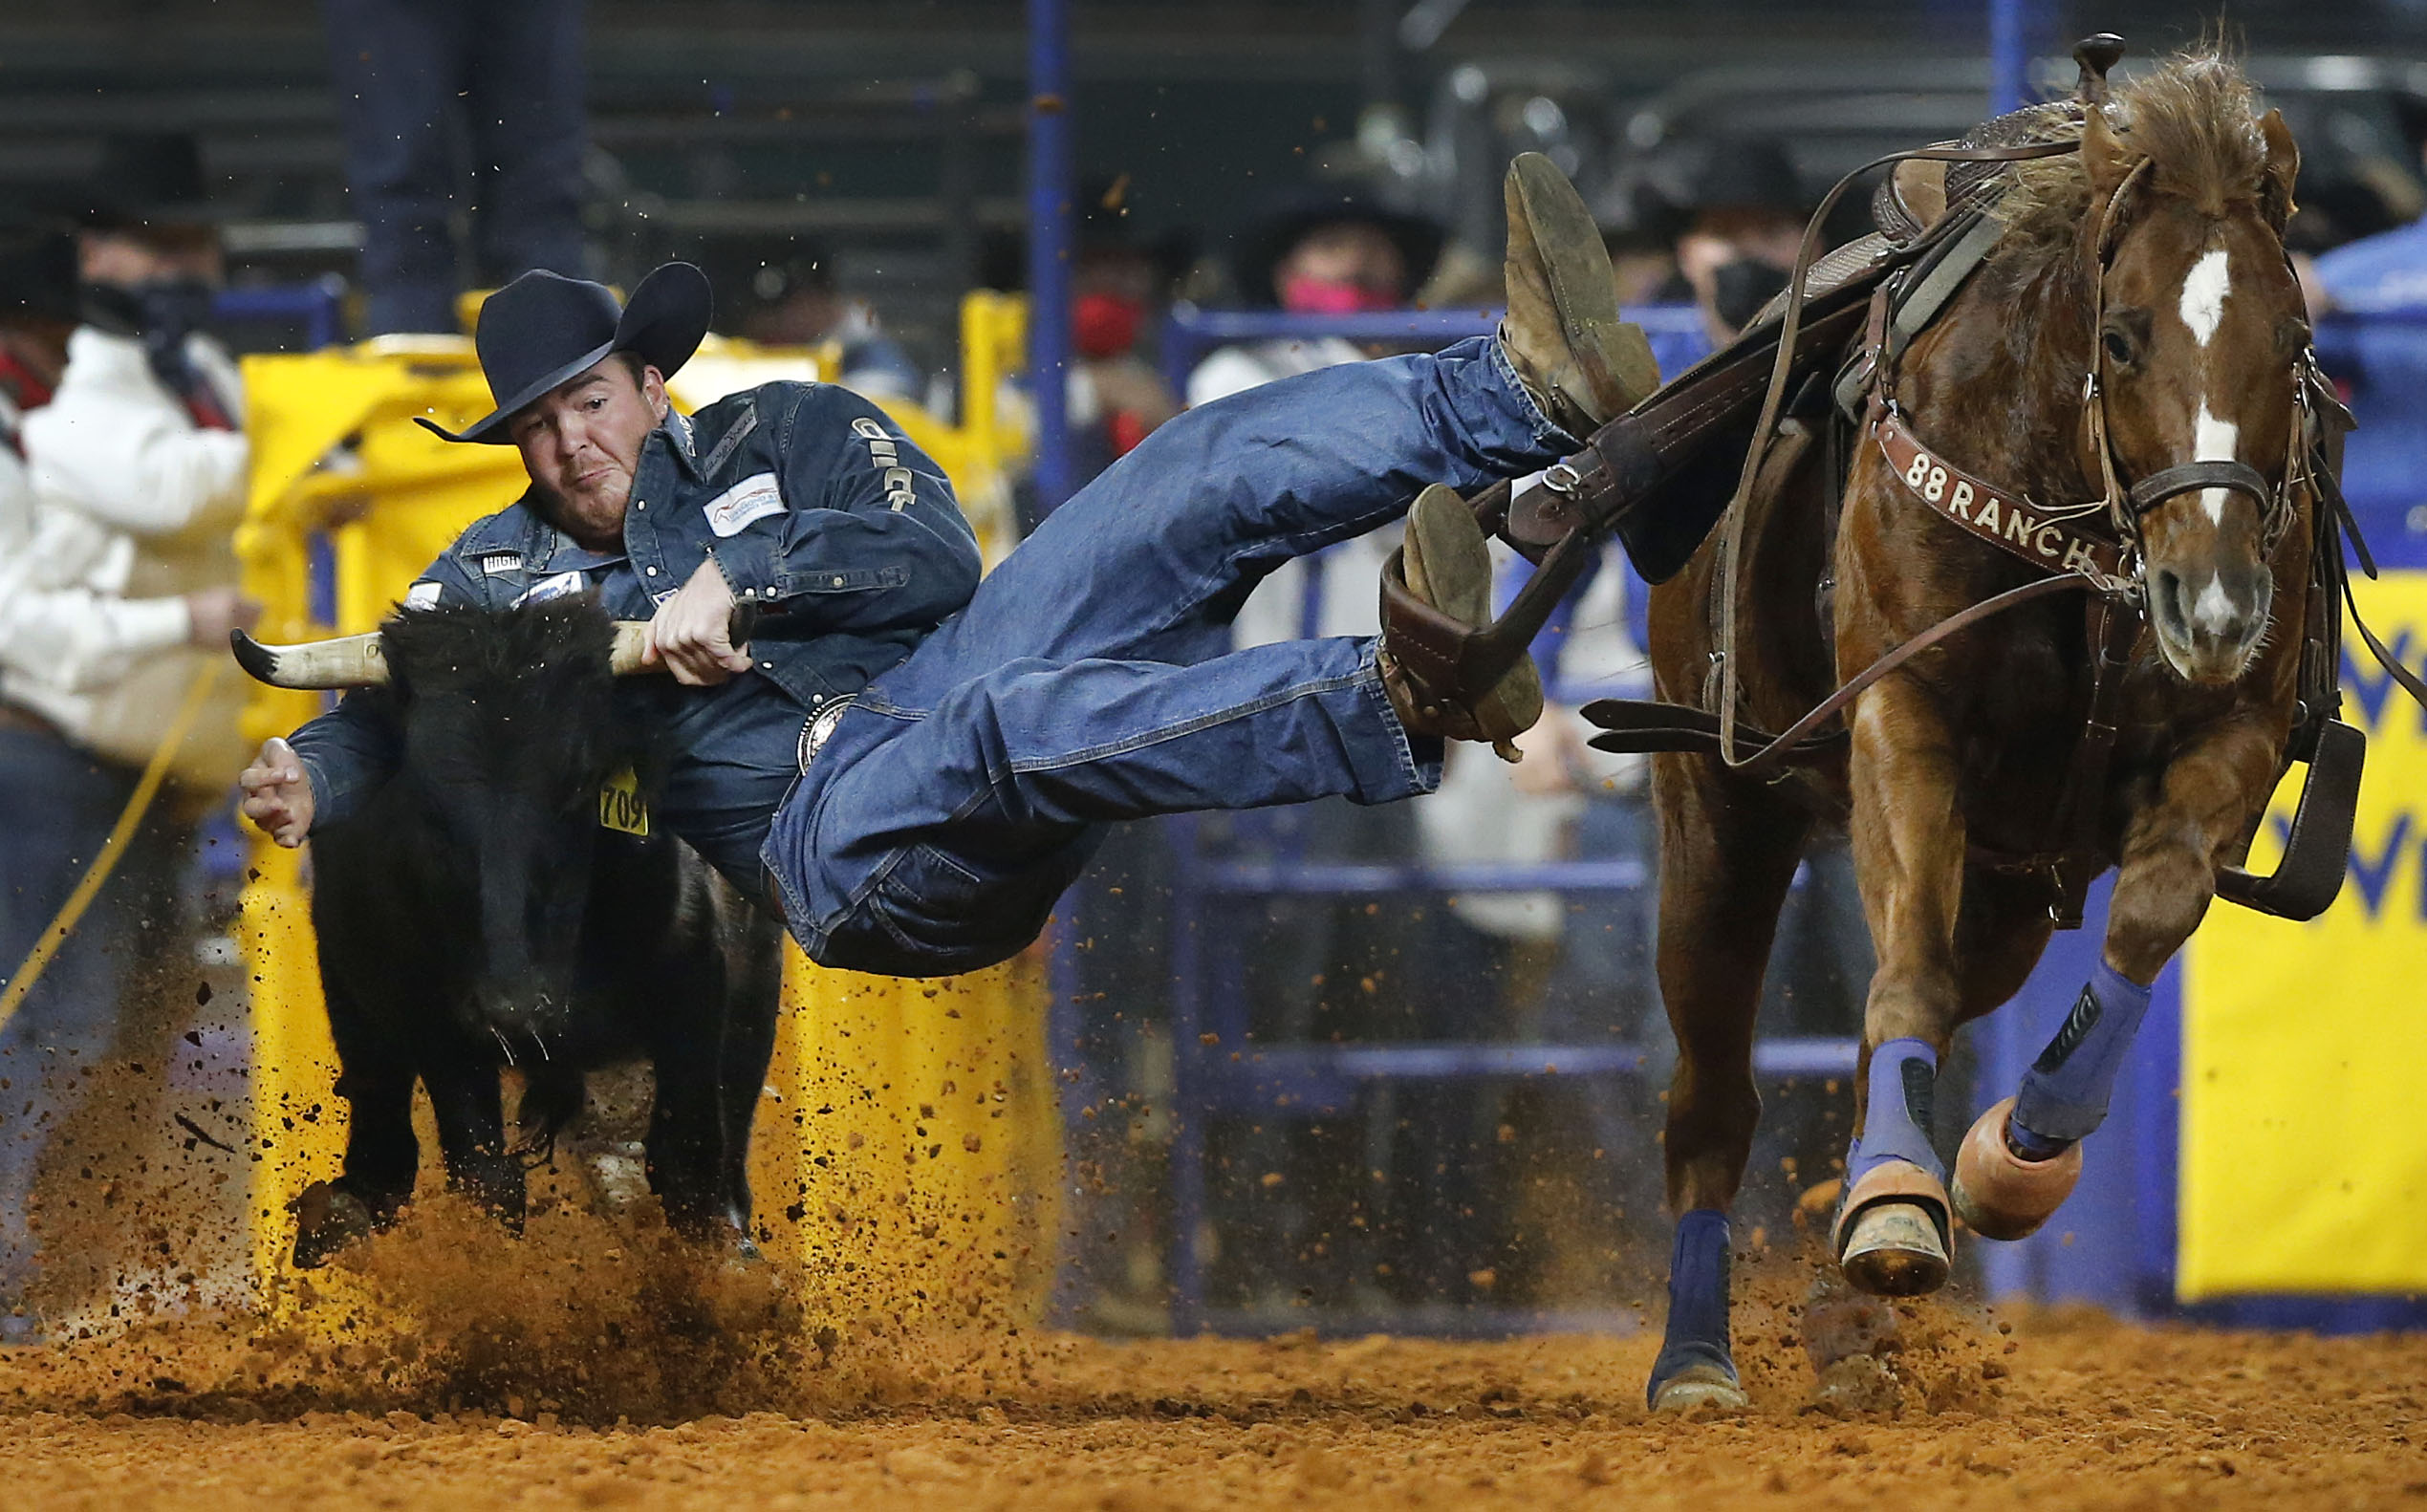 On final day of Wrangler National Finals Rodeo, PRCA spokesman says  relationship with Texas will continue